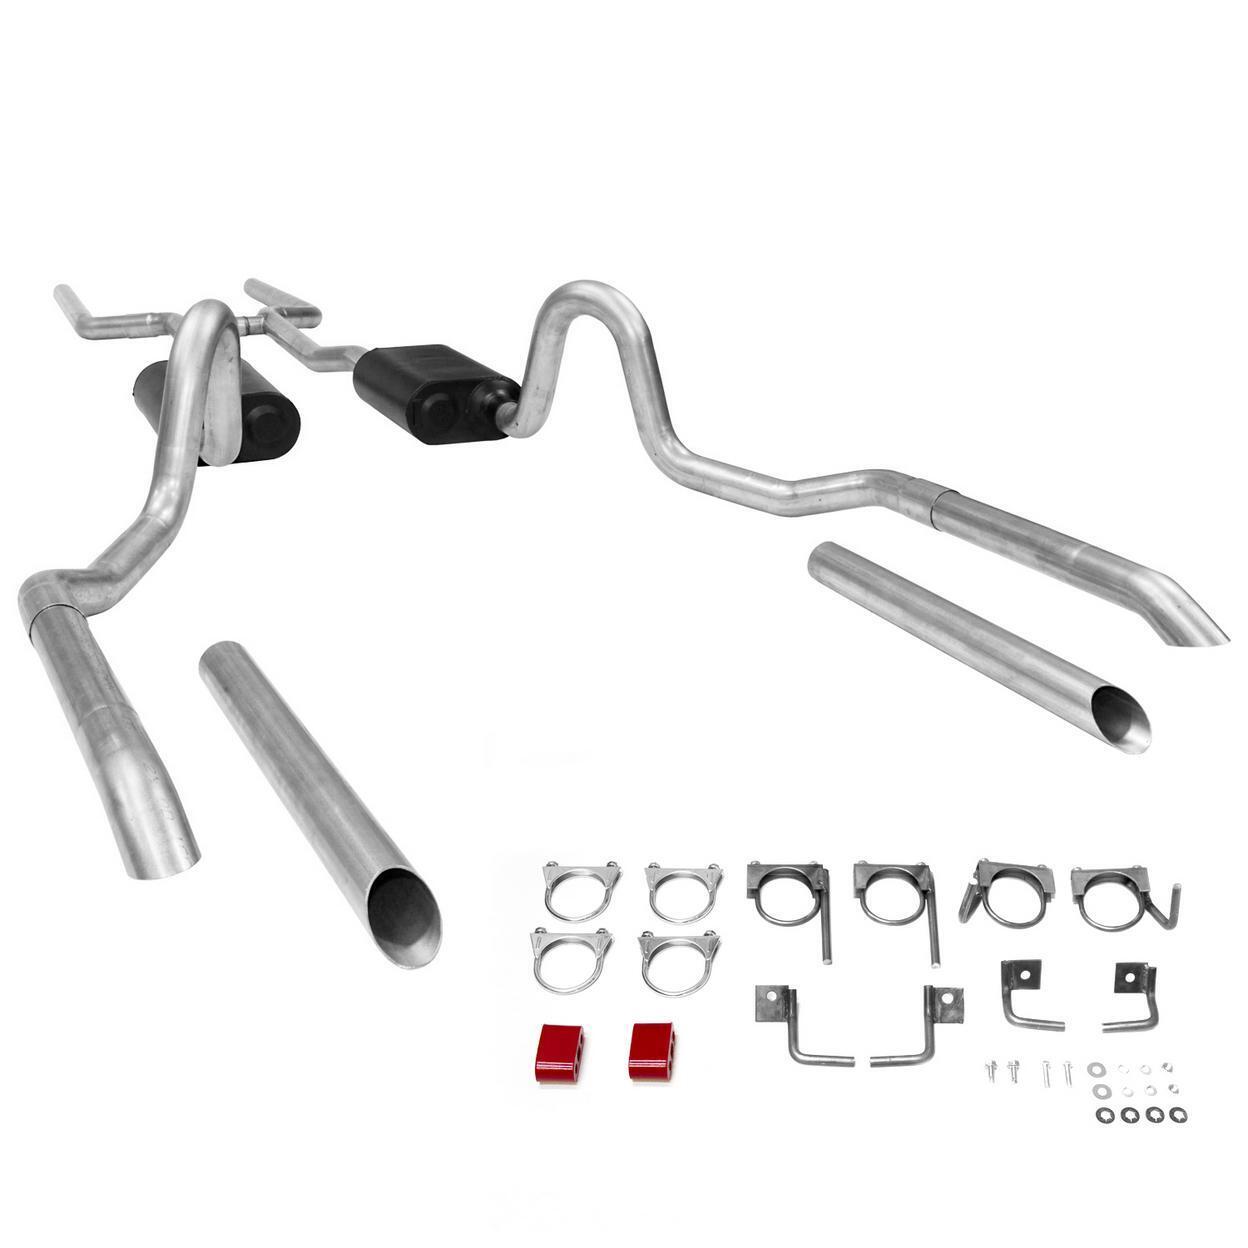 Exhaust System Kit for 1964-1967 Pontiac Beaumont